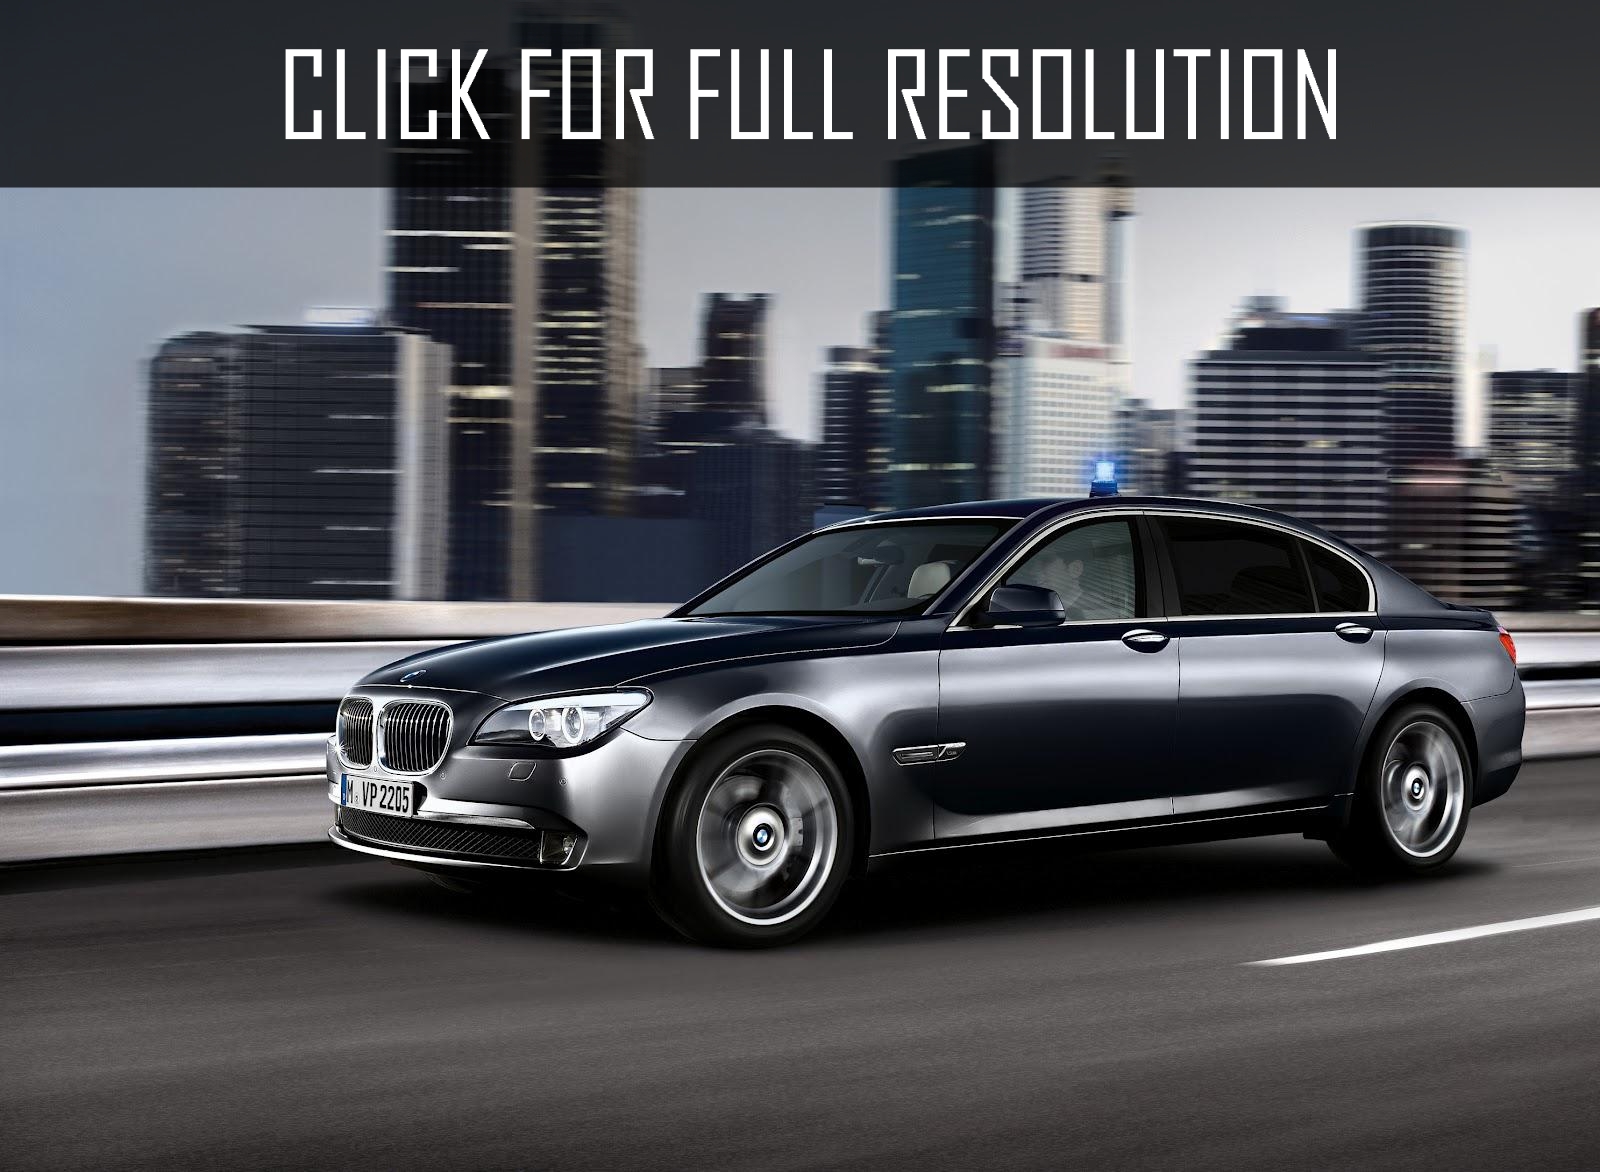 Bmw 7 Series Security Edition